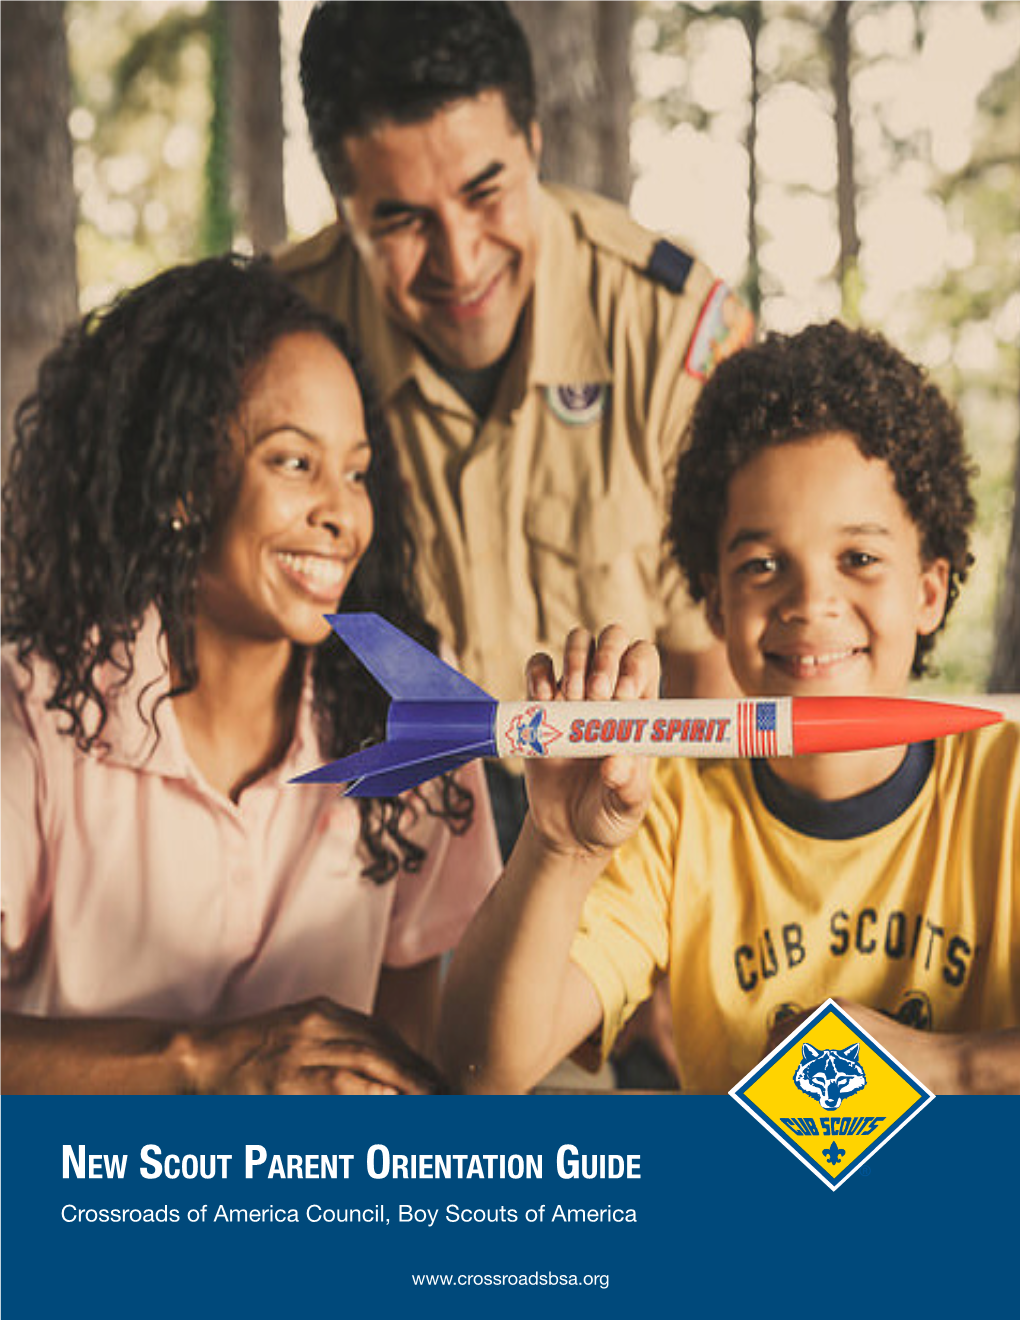 New Scout Parent Orientation Guide Crossroads of America Council, Boy Scouts of America